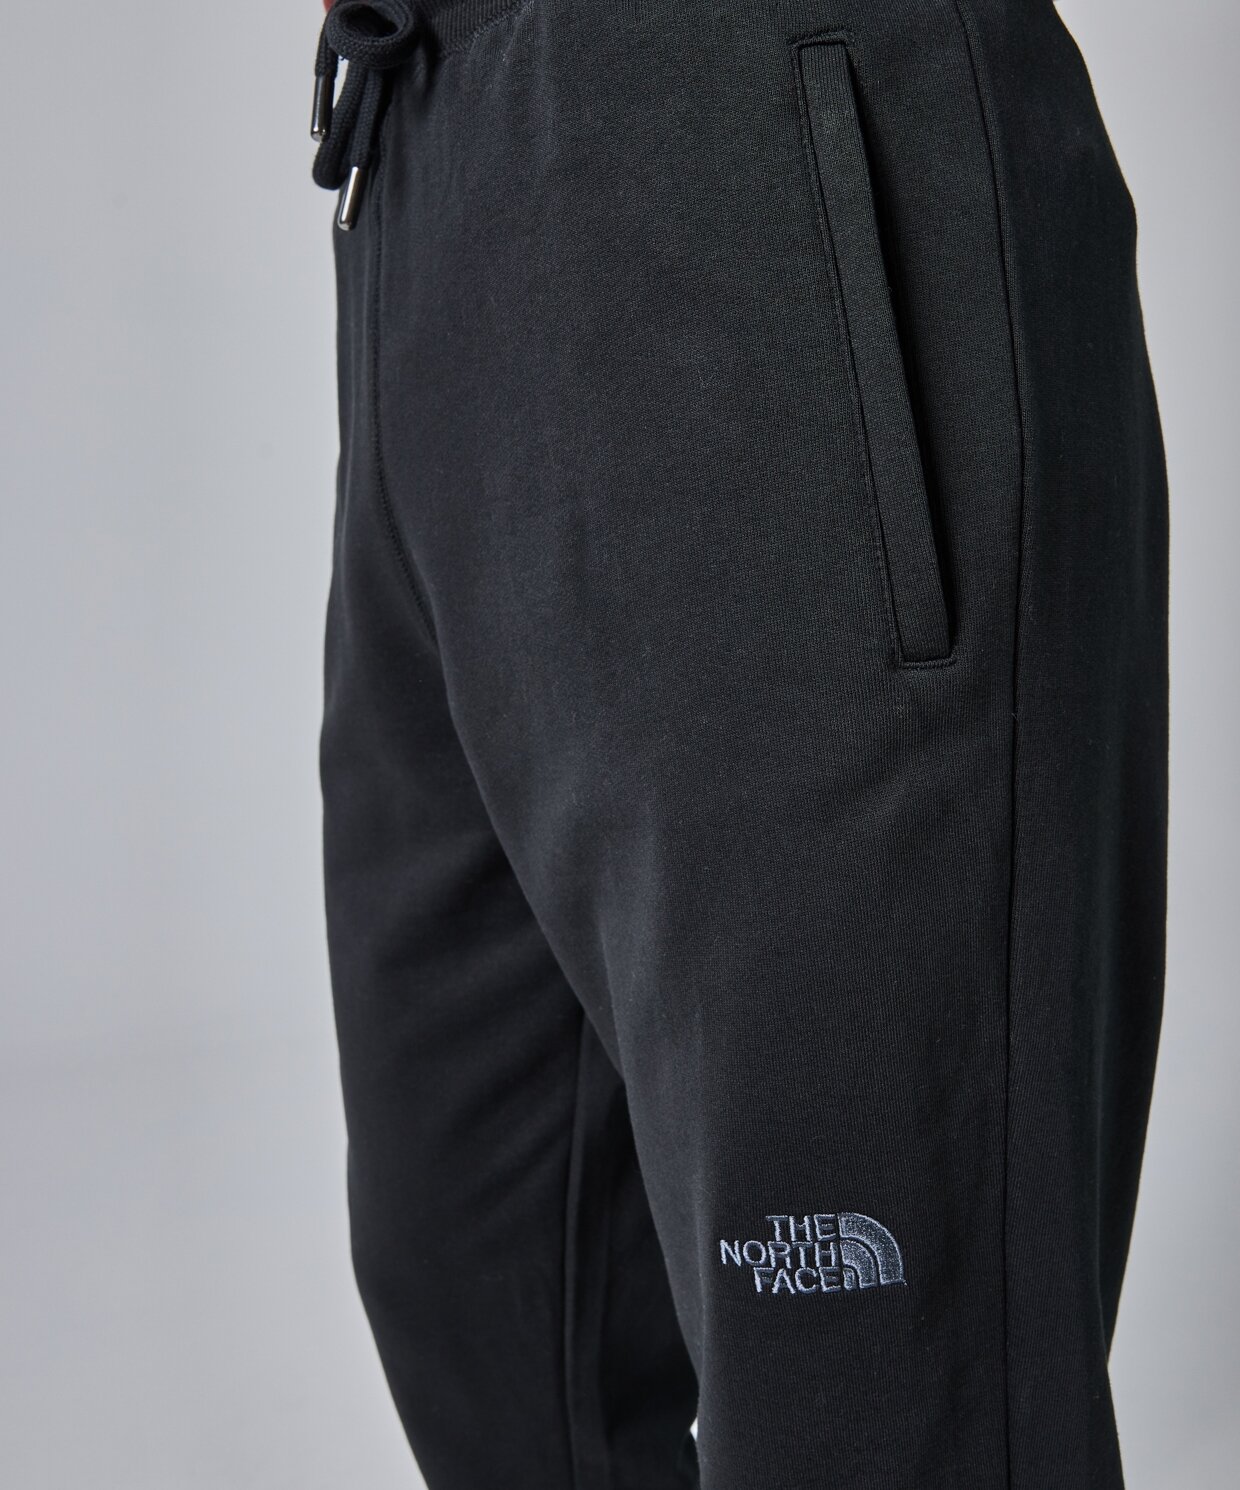 resm The North Face M Nse Light Pant